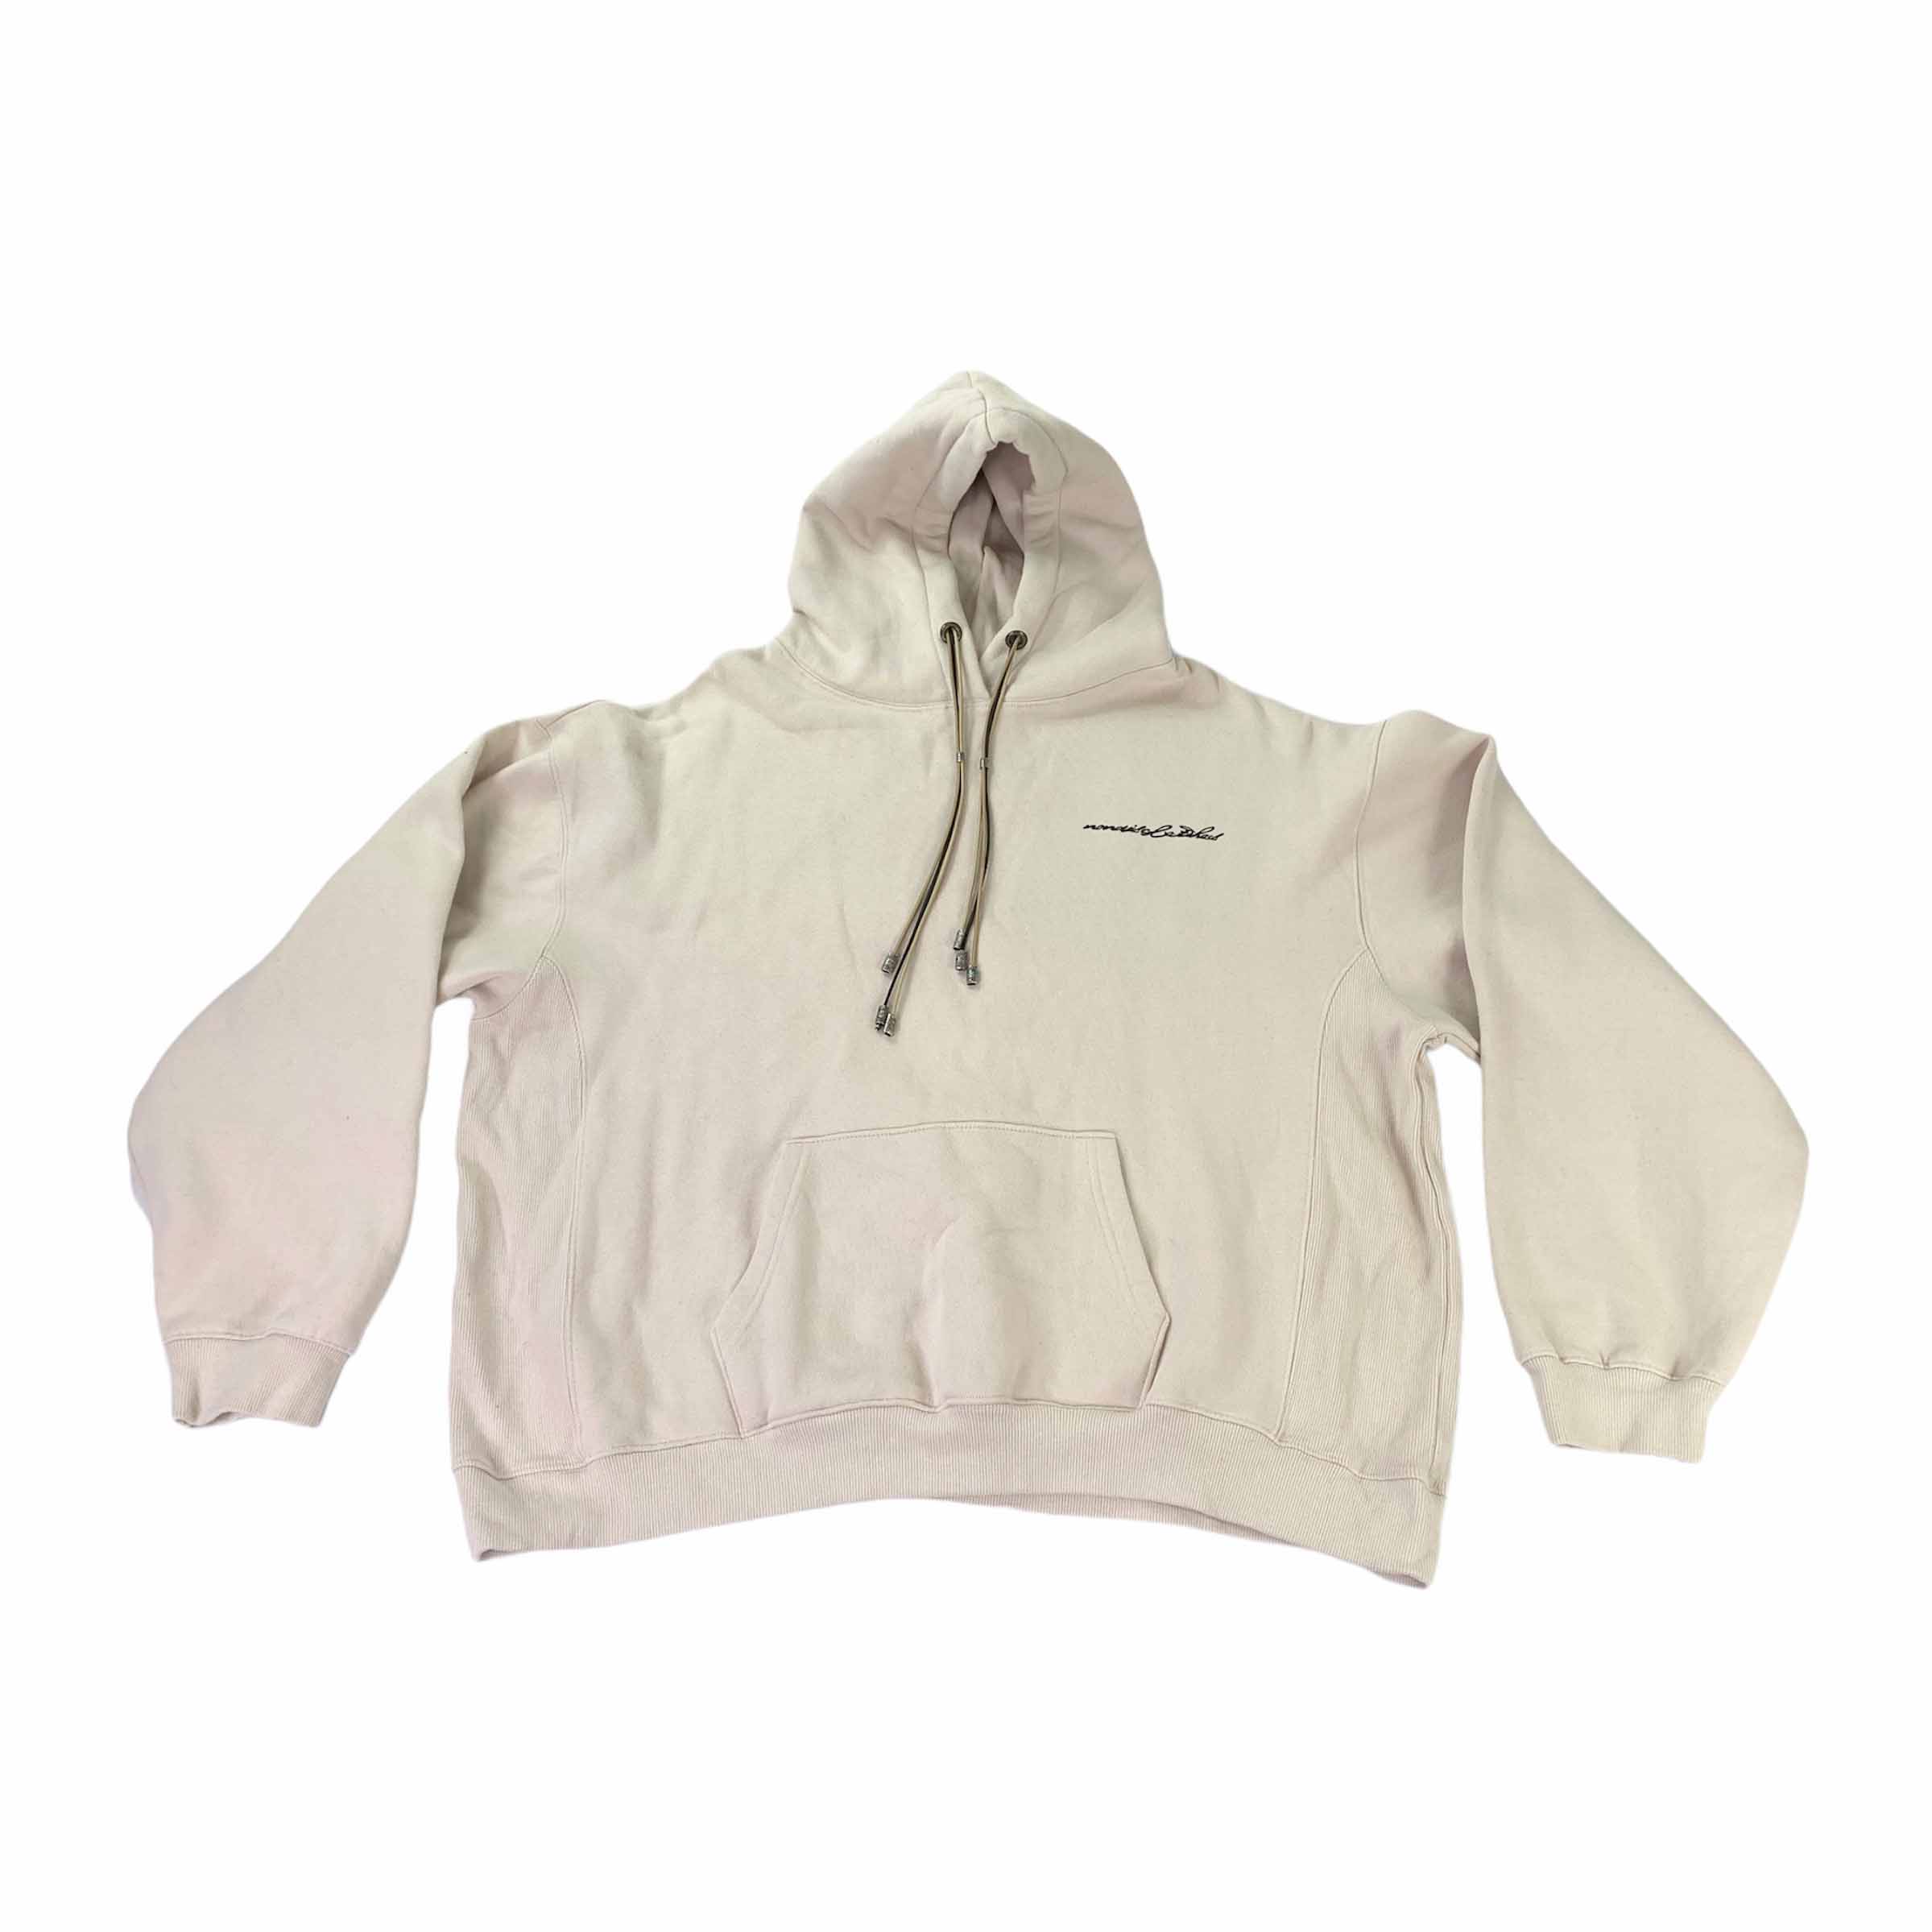 [Nondisclothes] Beige Hoodie with Strings - Size L